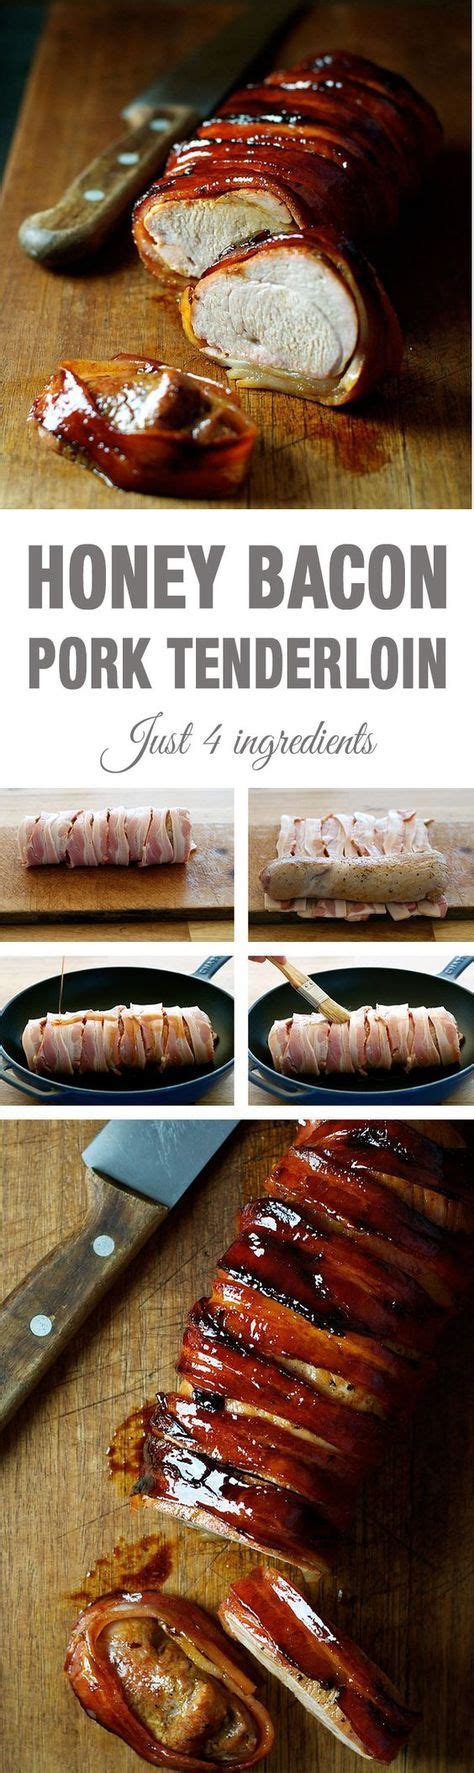 This meat intimidates many amateur chefs, but it's surprisingly easy to prepare,. Bacon Wrapped Pork Tenderloin | Recipe | Recipes, Bacon ...